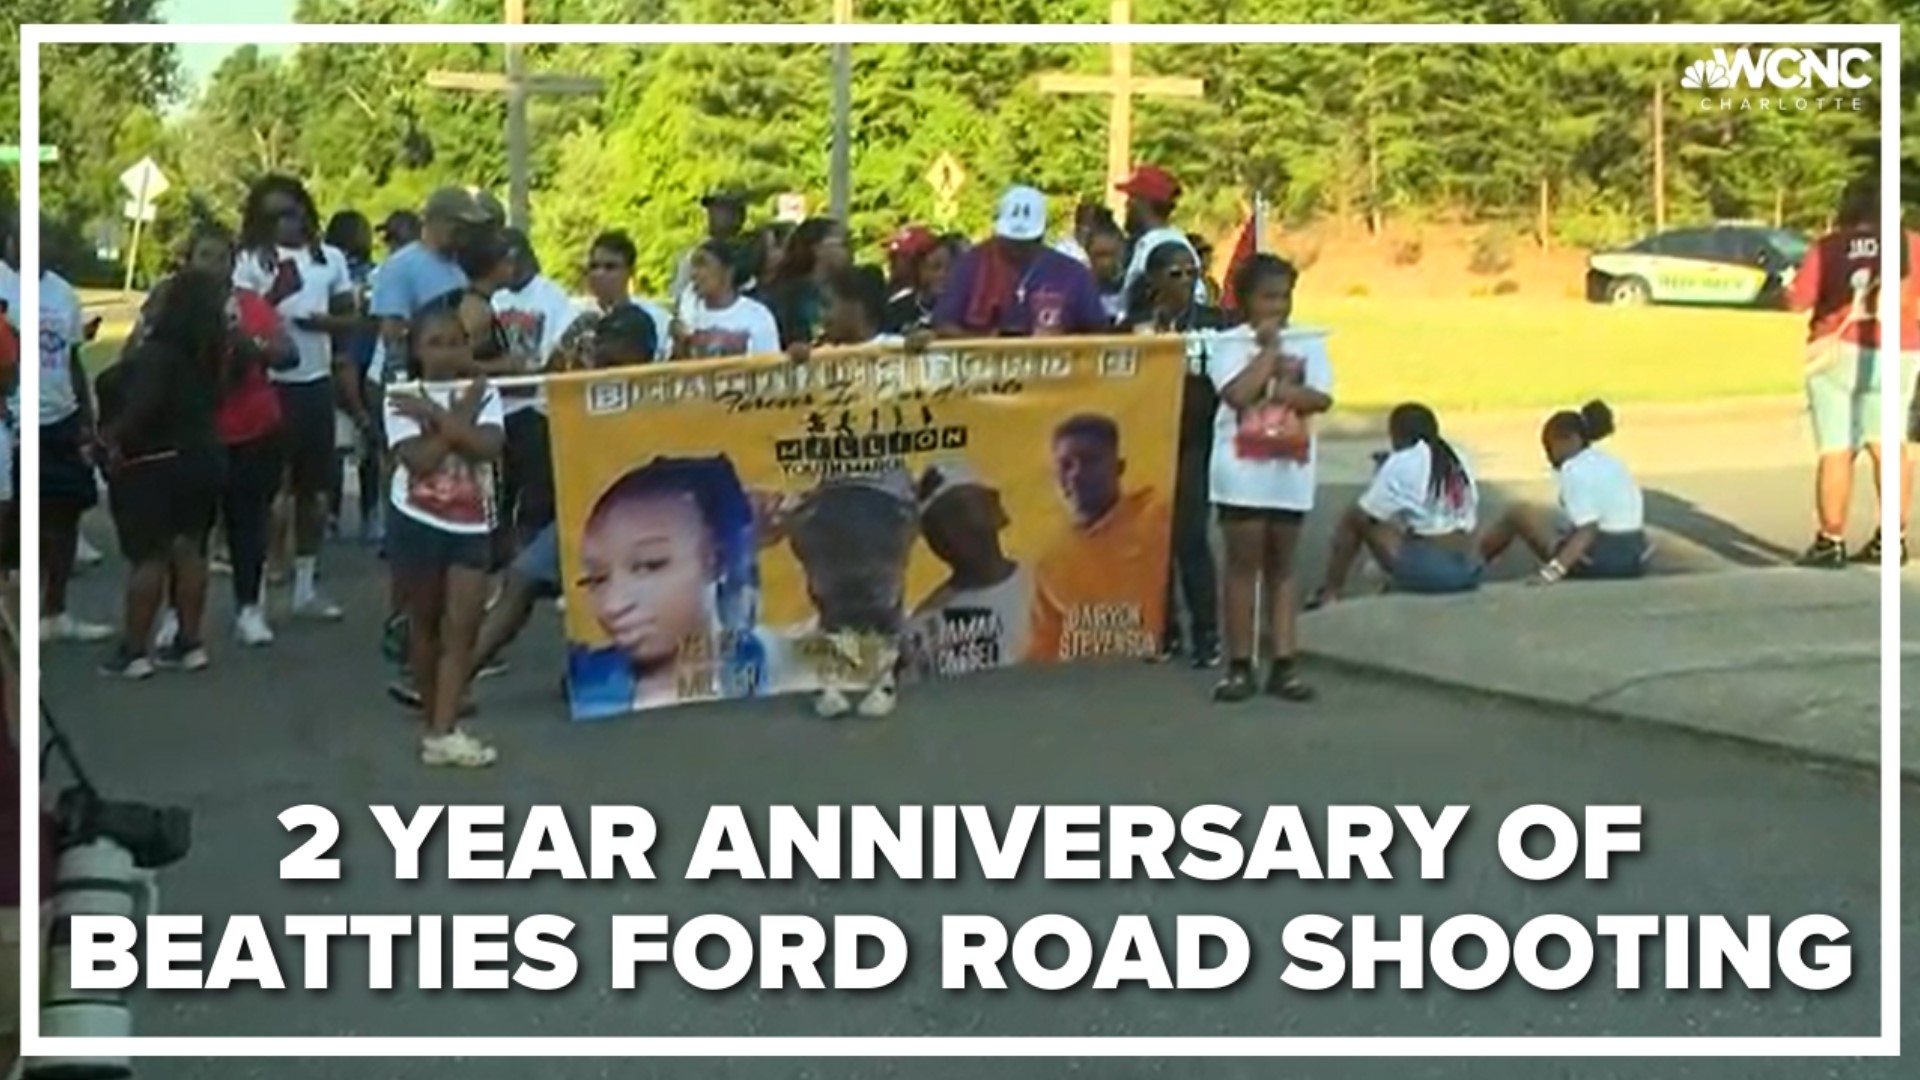 Community members gathered at the shooting site on Wednesday to honor the victims and push for answers.